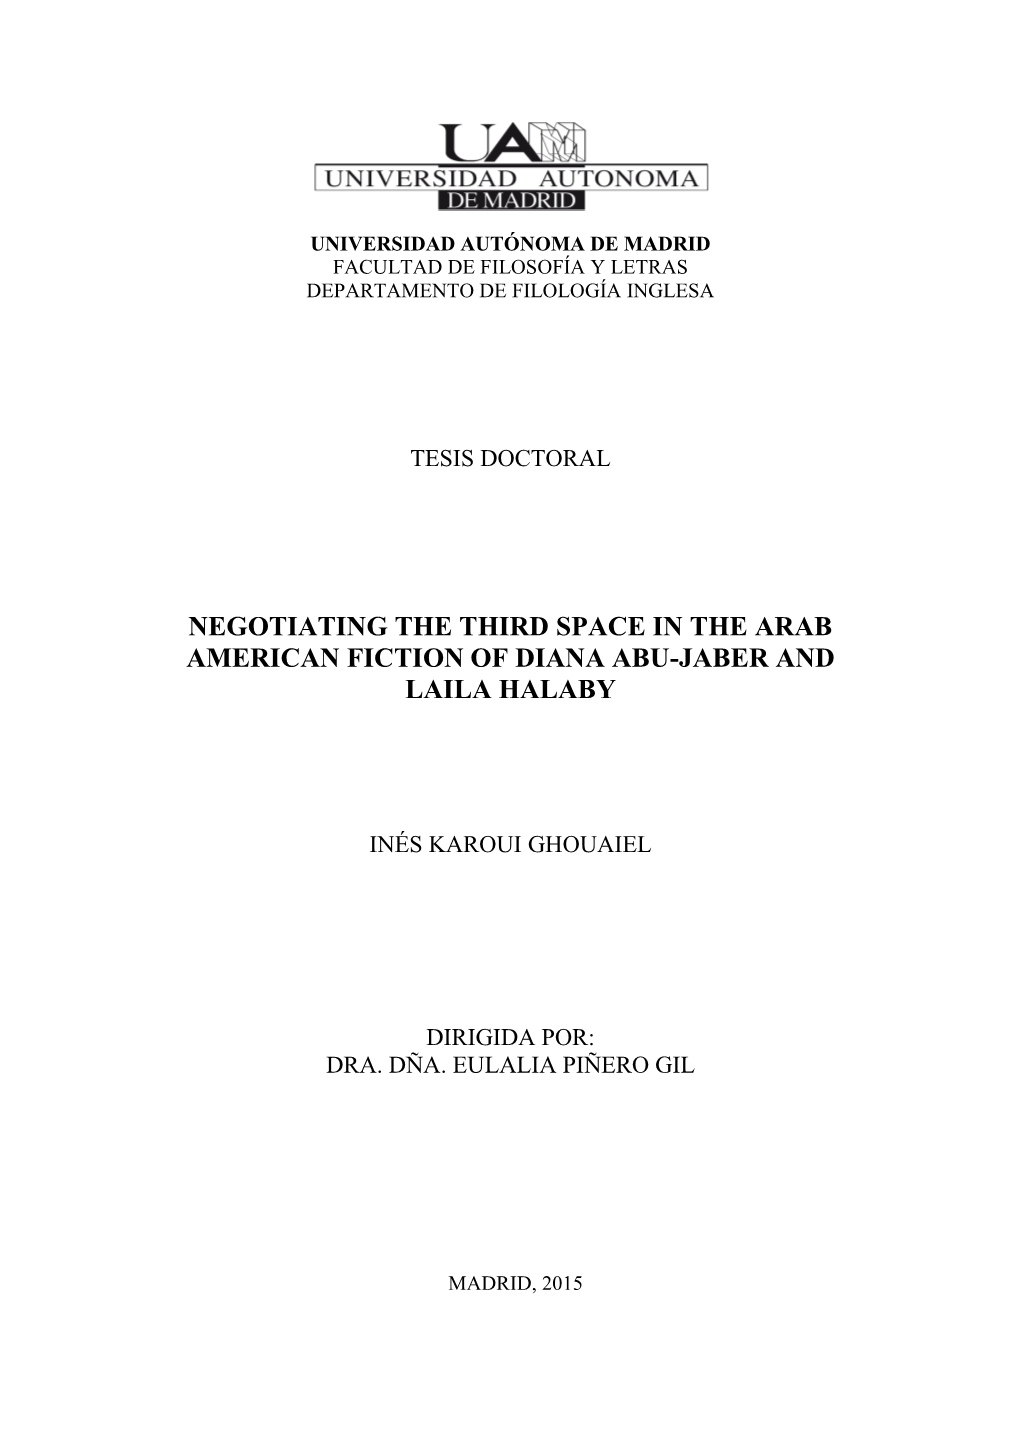 Negotiating the Third Space in the Arab American Fiction of Diana Abu-Jaber and Laila Halaby